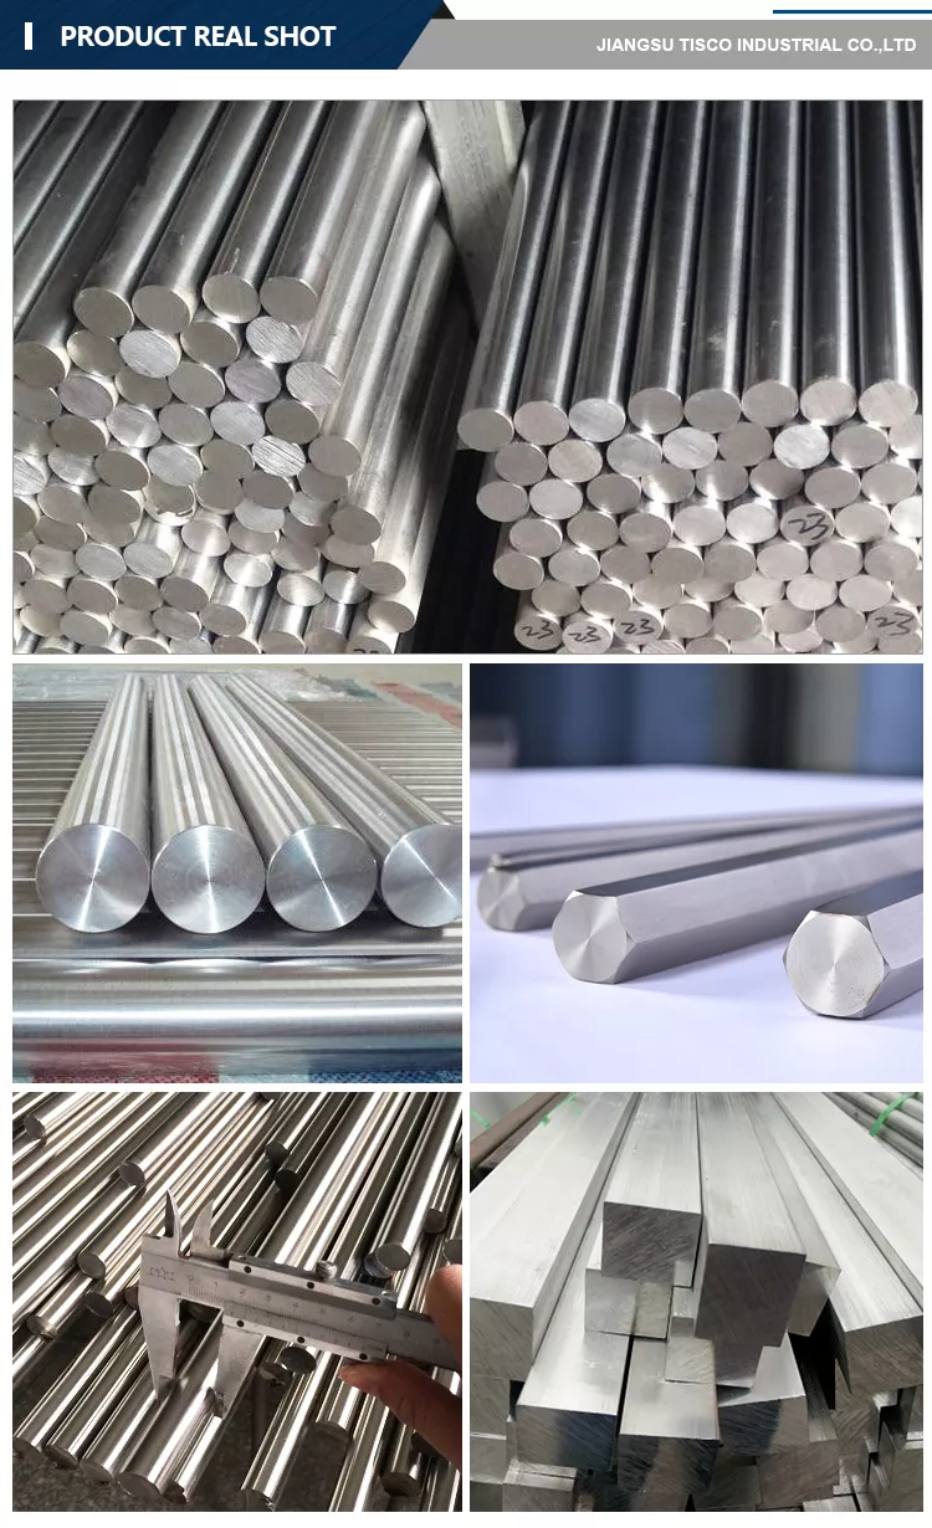 Image of Stainless Square Solid Steel Bar